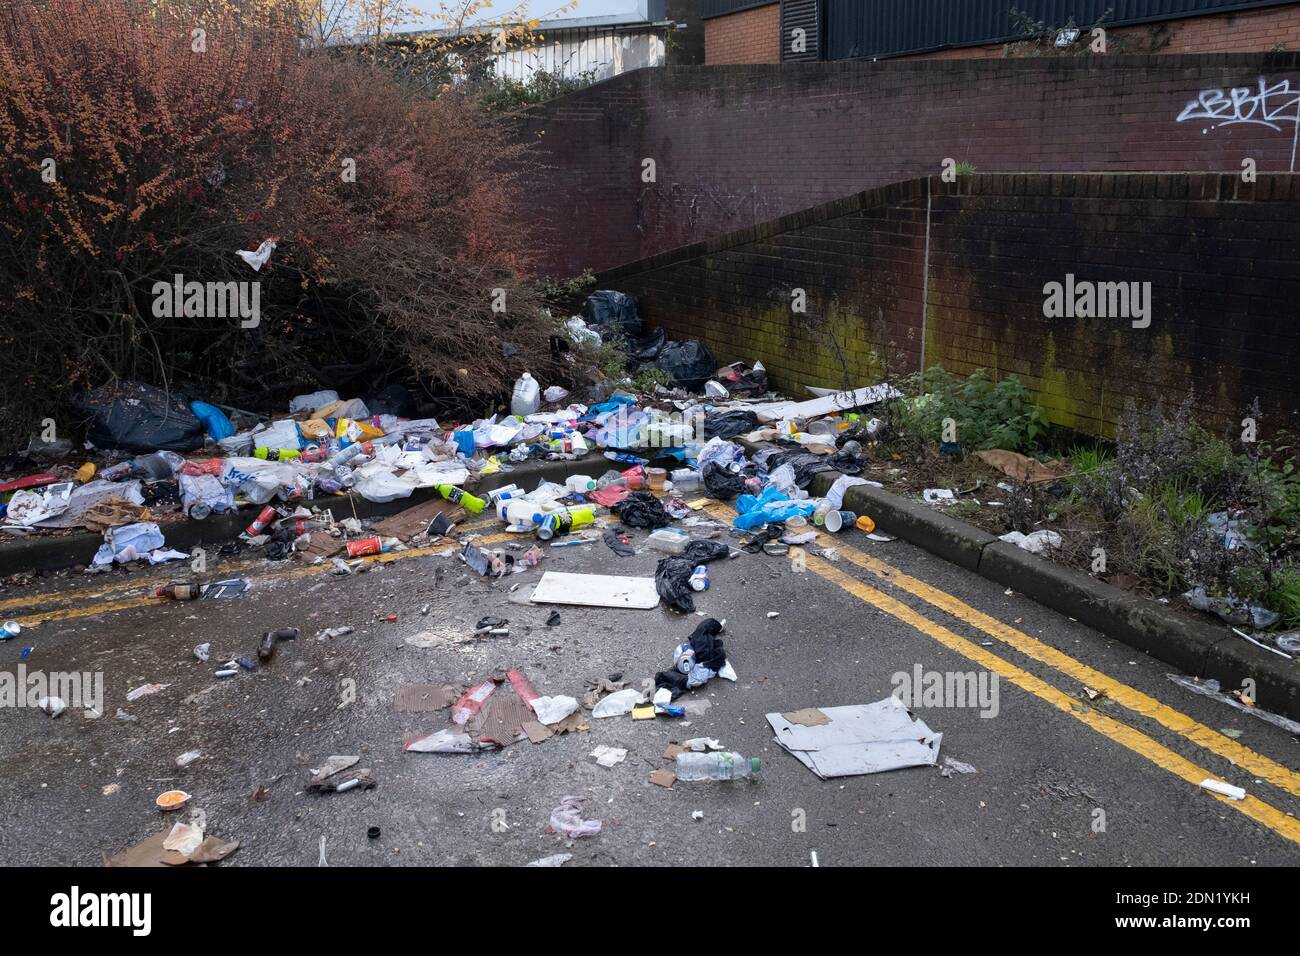 Fly tipped waste on the street in Highgate close to the city centre on 14th December 2020 in Birmingham, United Kingdom. Illegal dumping, also called fly dumping or fly tipping, is the dumping of waste illegally instead of using an authorised method such as kerbside collection or using an authorised rubbish dump. It is the illegal deposit of any waste onto land, including waste dumped or tipped on a site with no licence to accept waste. Stock Photo